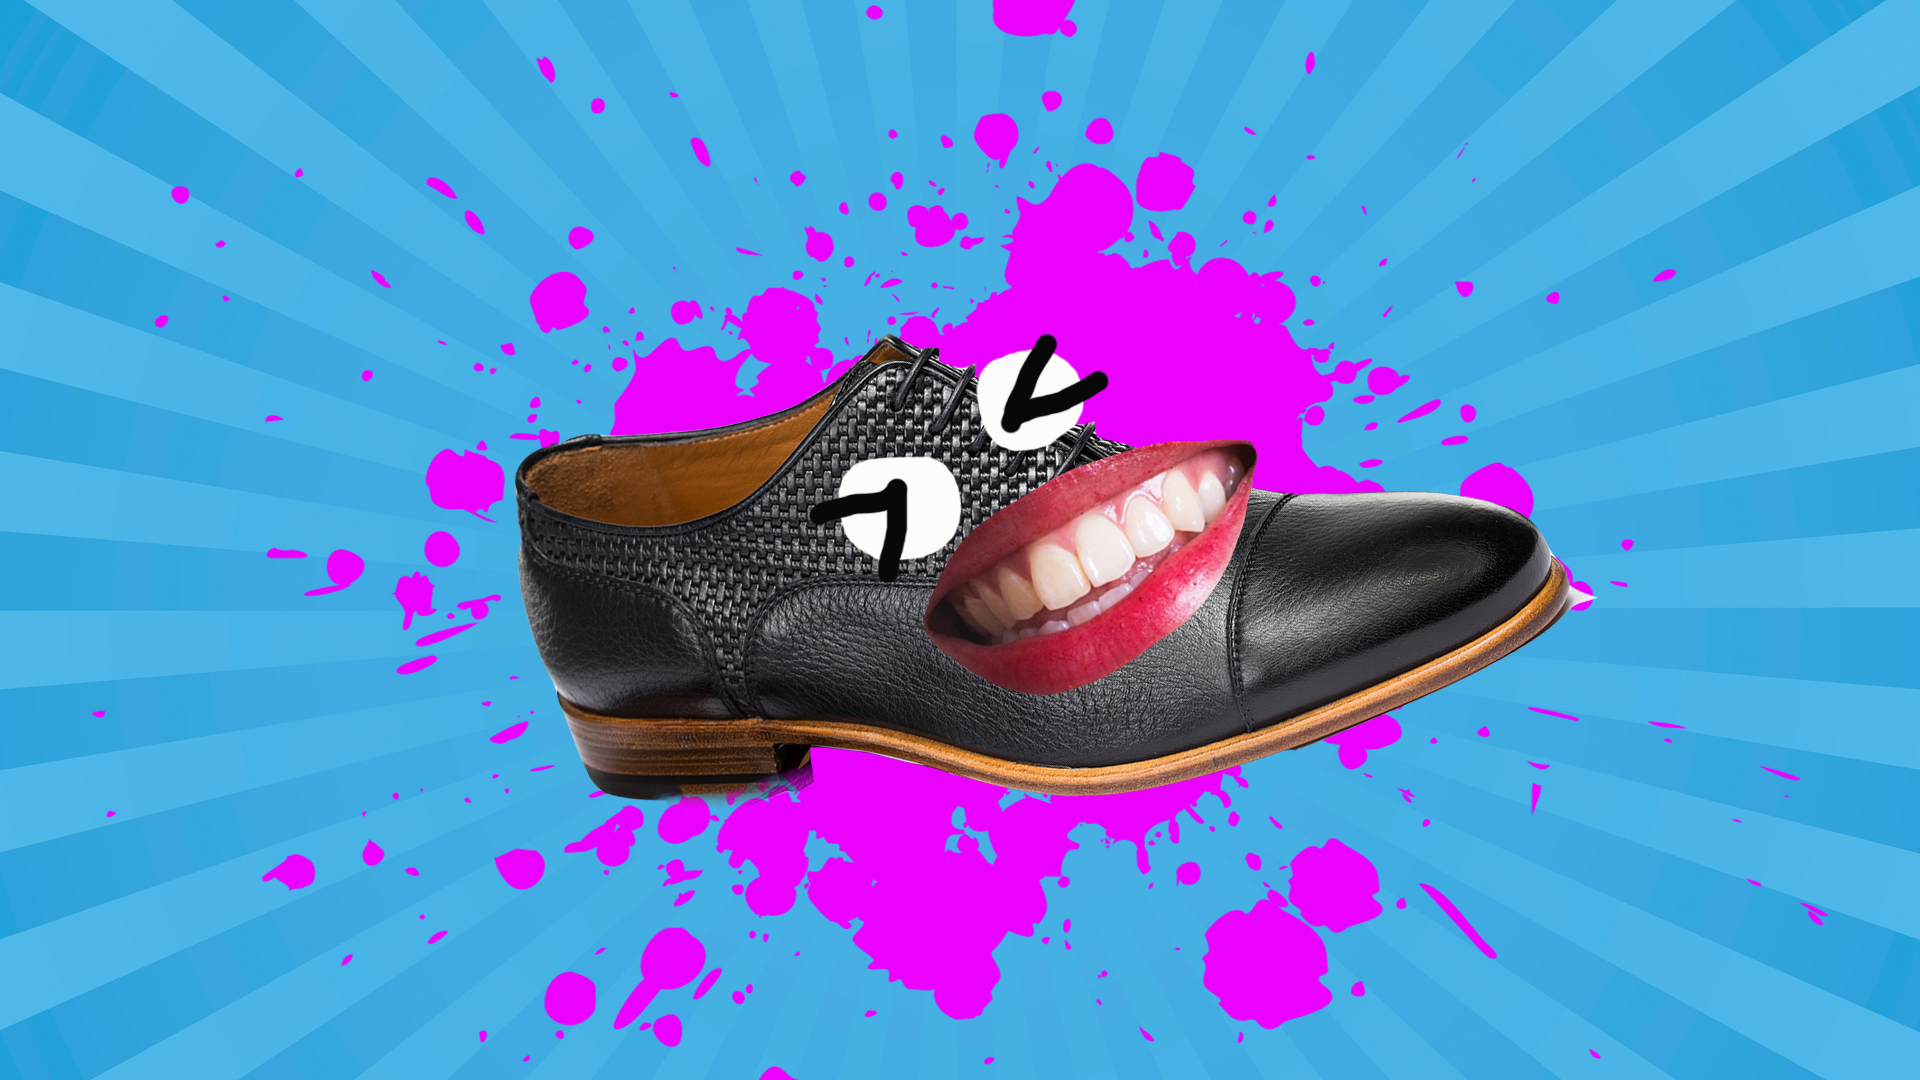 A laughing shoe